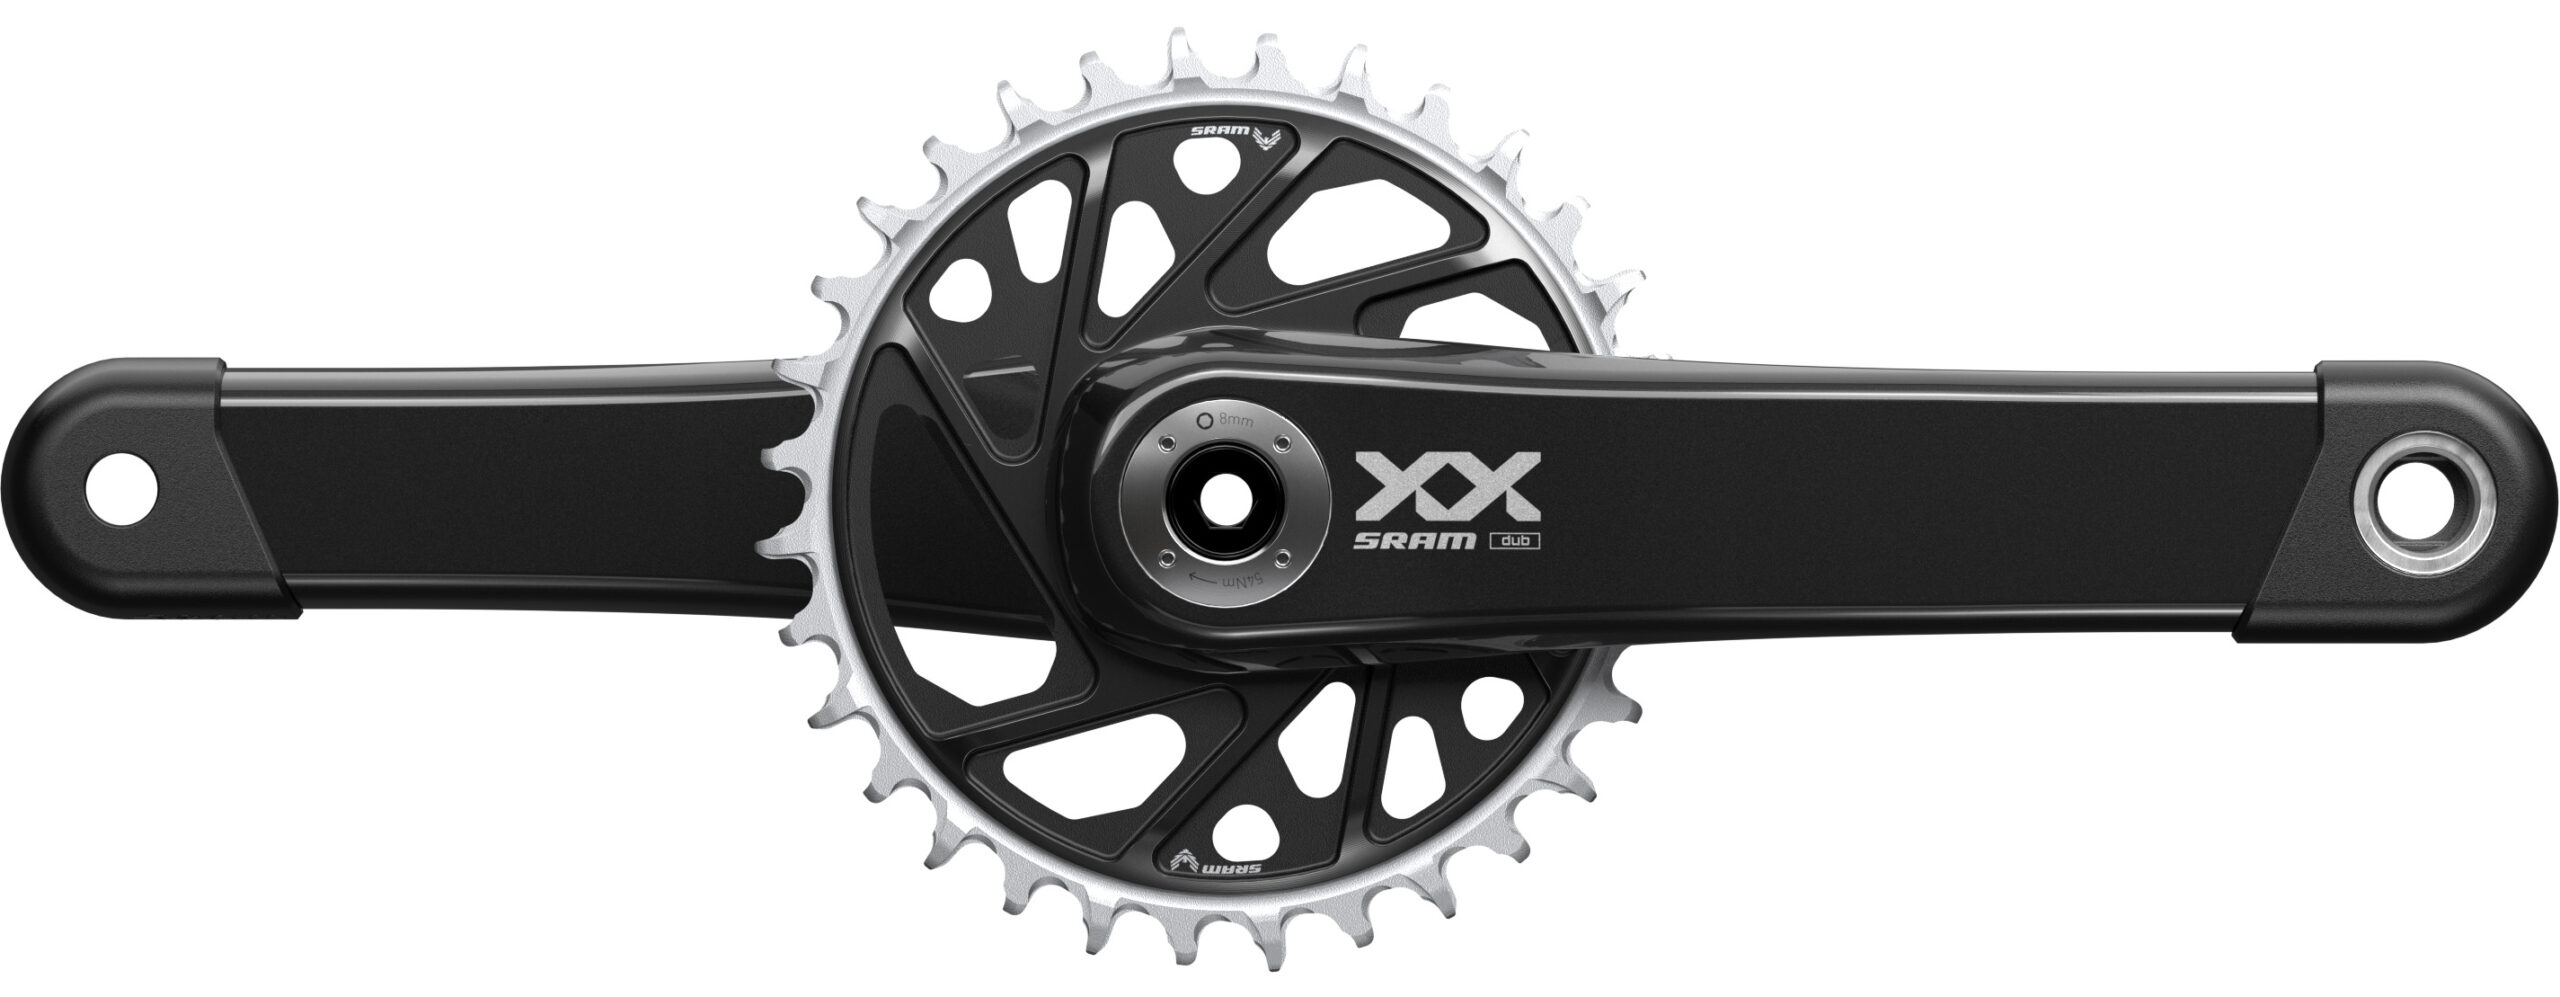 David Golay reviews the SRAM Eagle Transmission for Blister